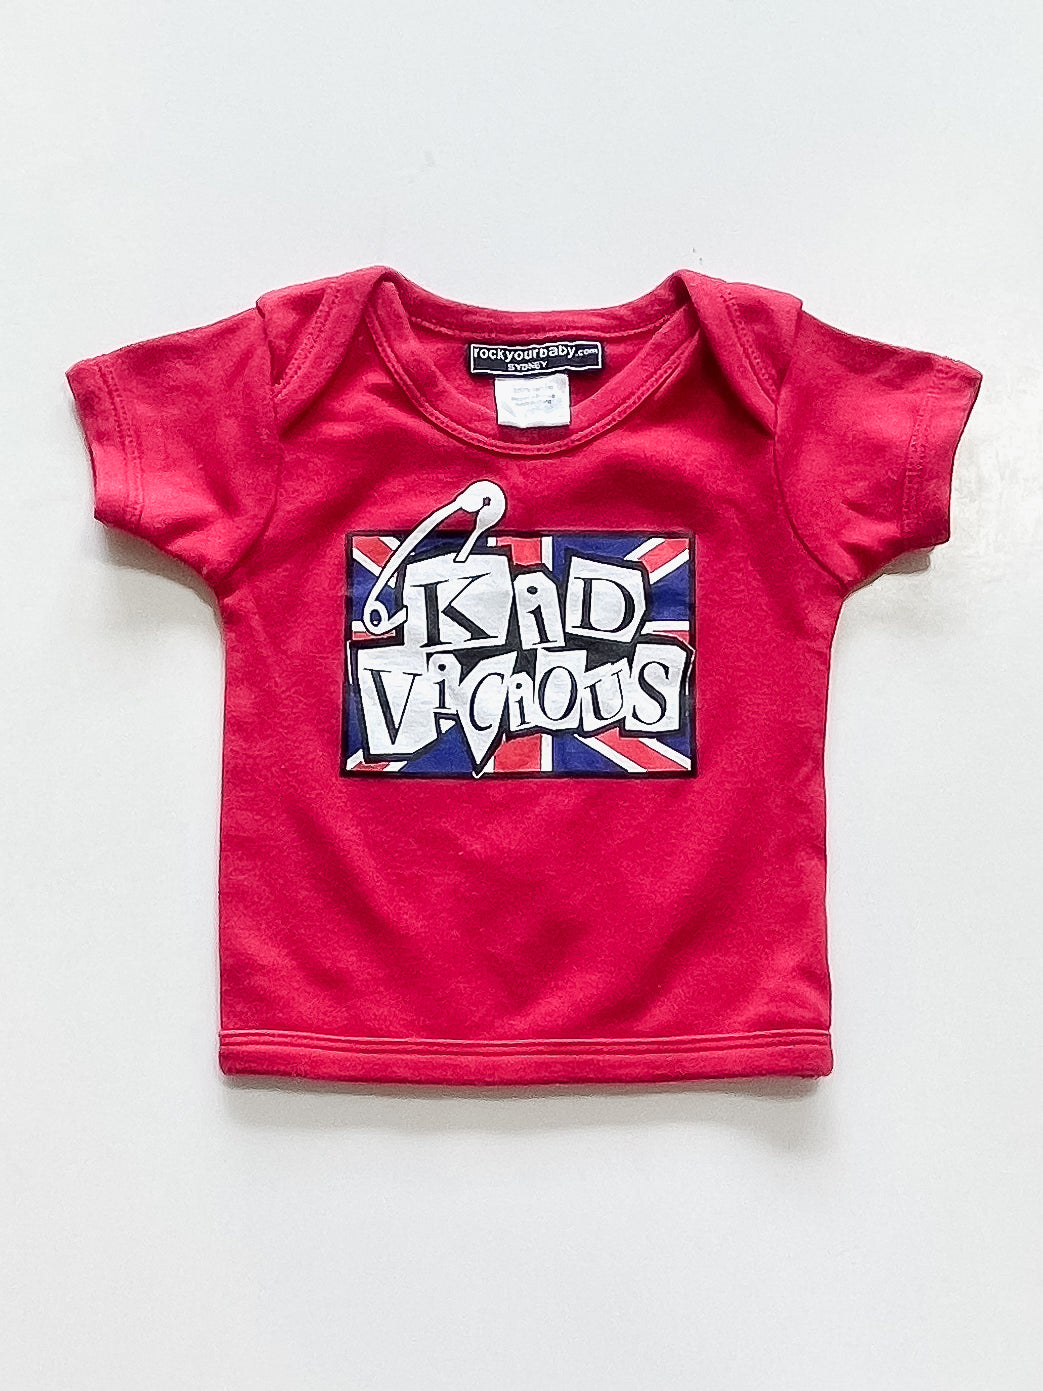 Rock Your Baby kid vicious tee (0-3m)